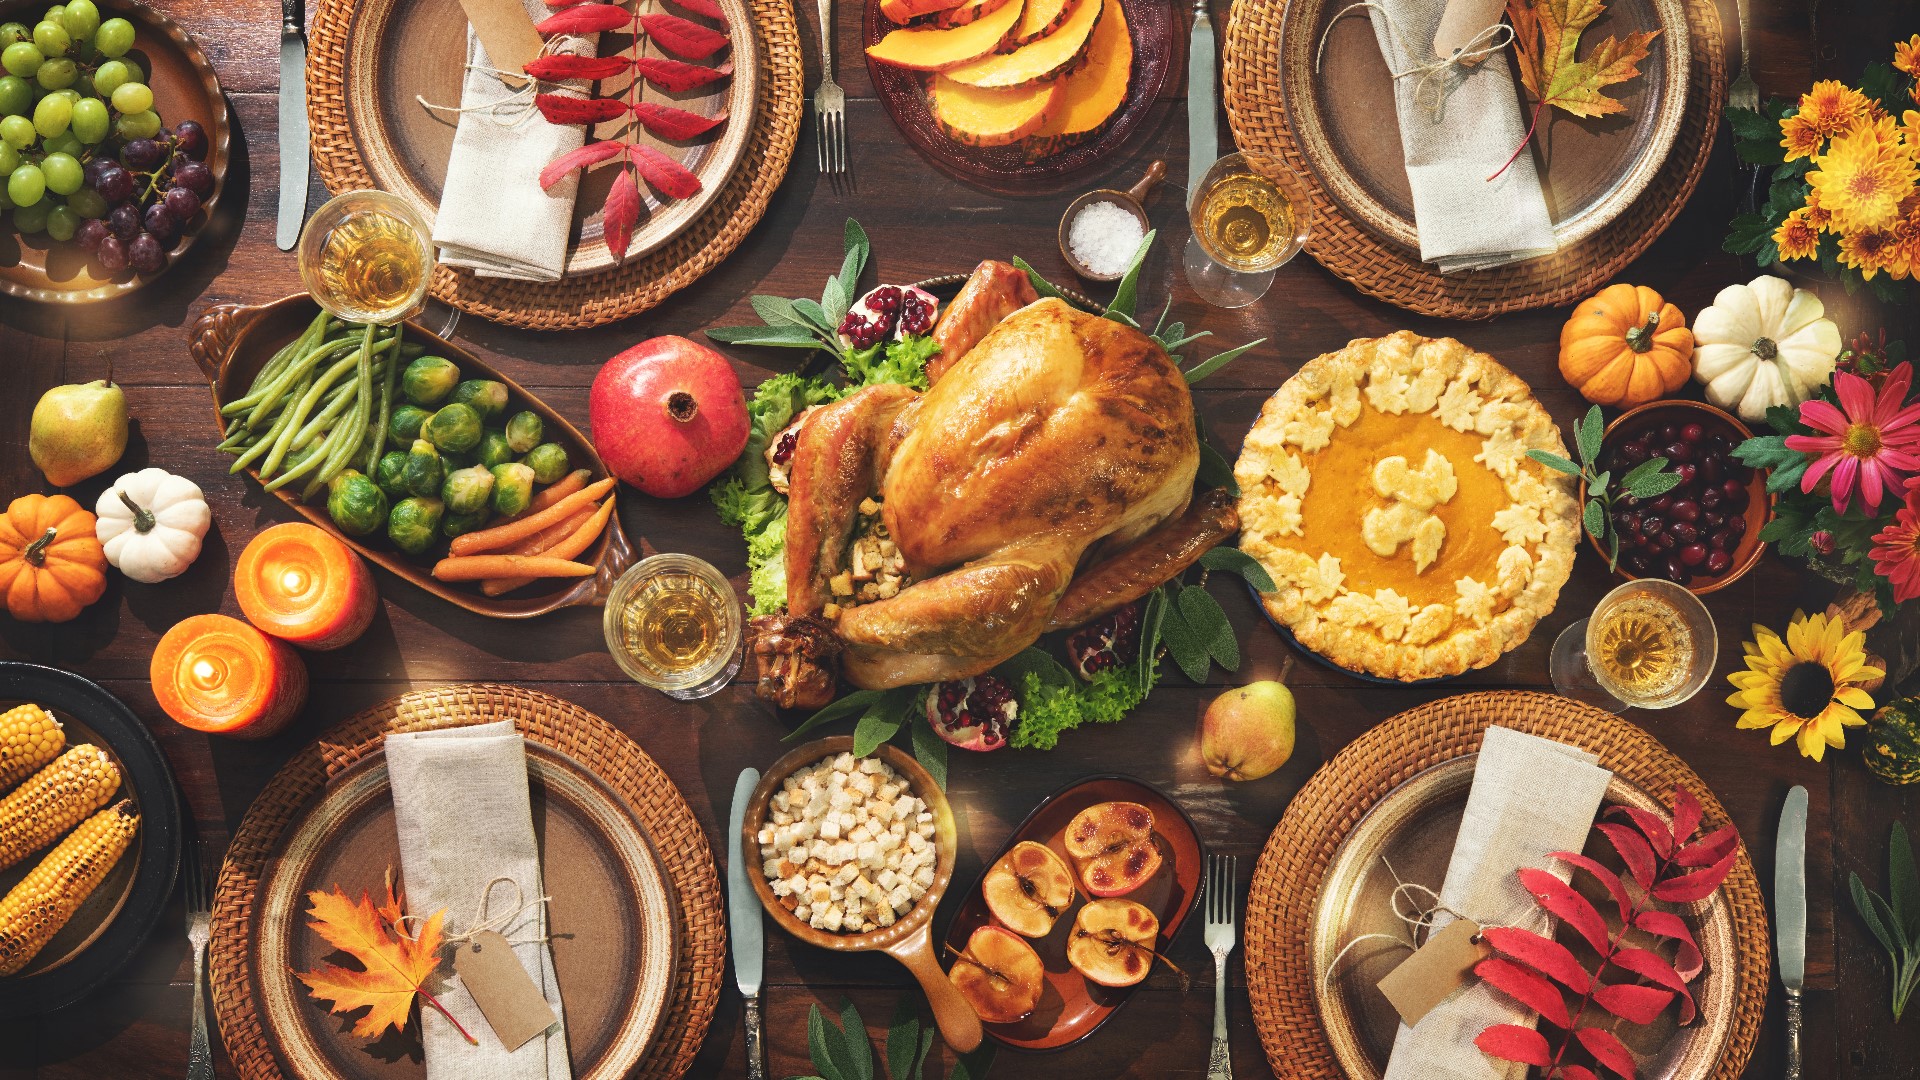 Cherie shares some helpful advice to prepare your Thanksgiving feast.